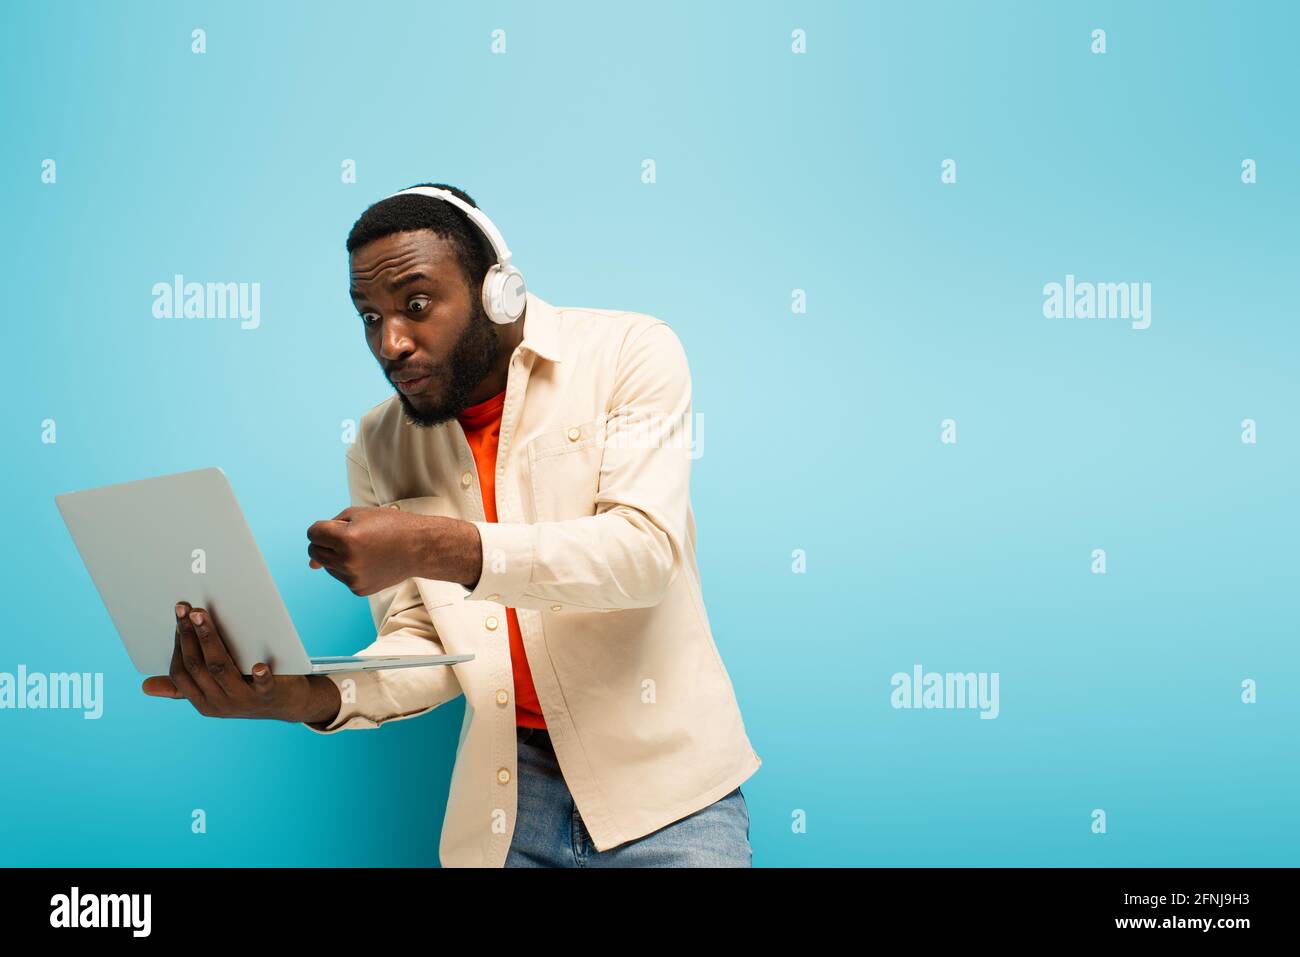 Angry African American Man In Headphones Showing Clenched Fist Near Laptop On Blue Background